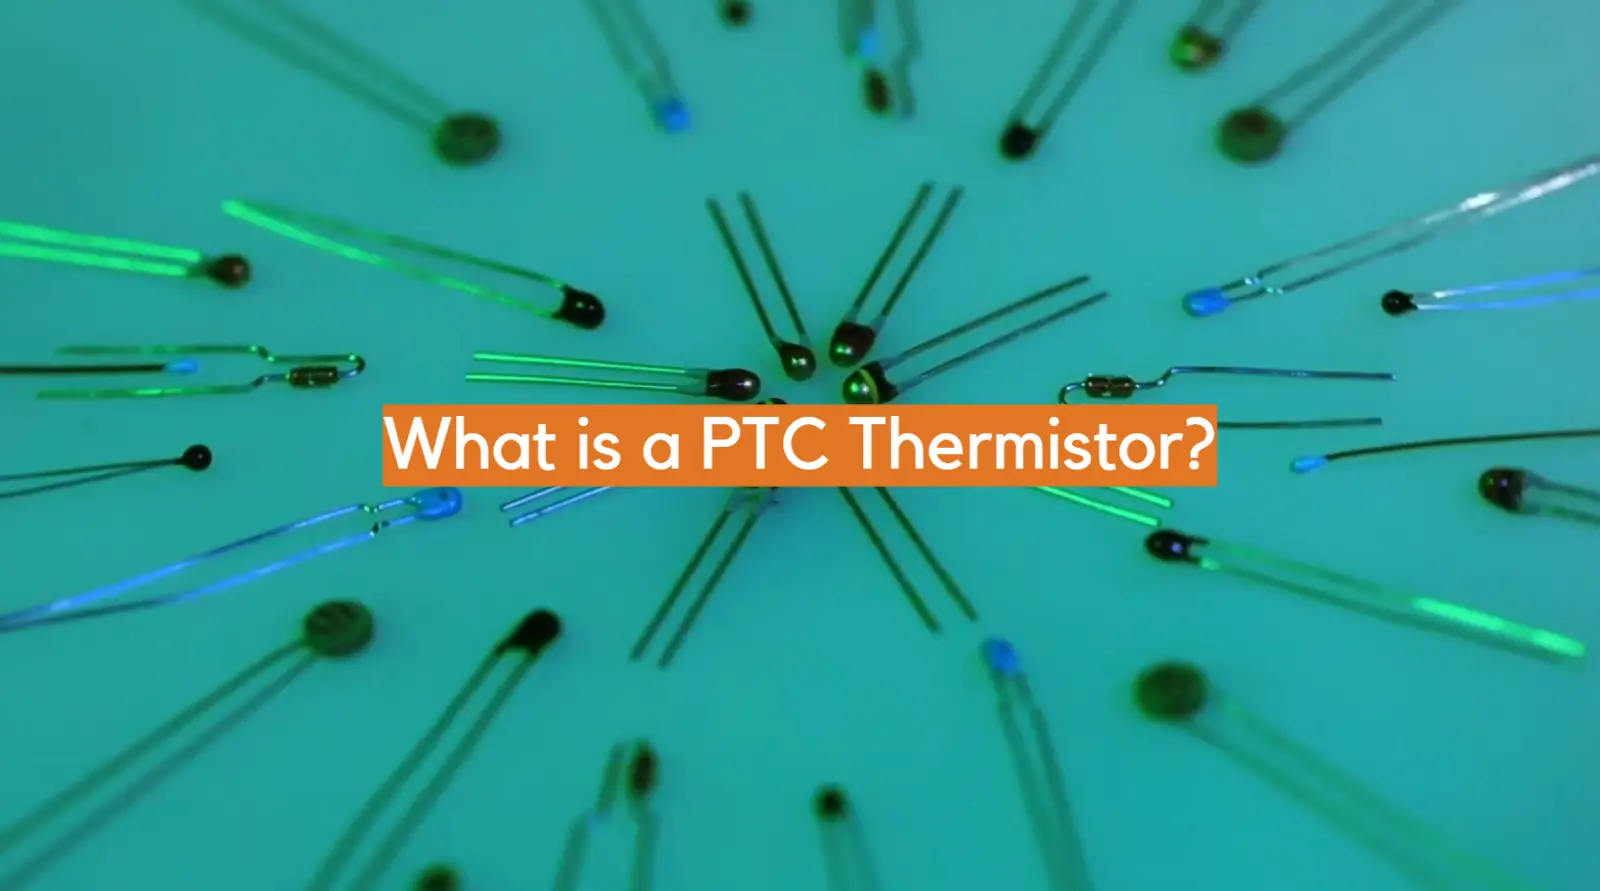 What is a PTC Thermistor?